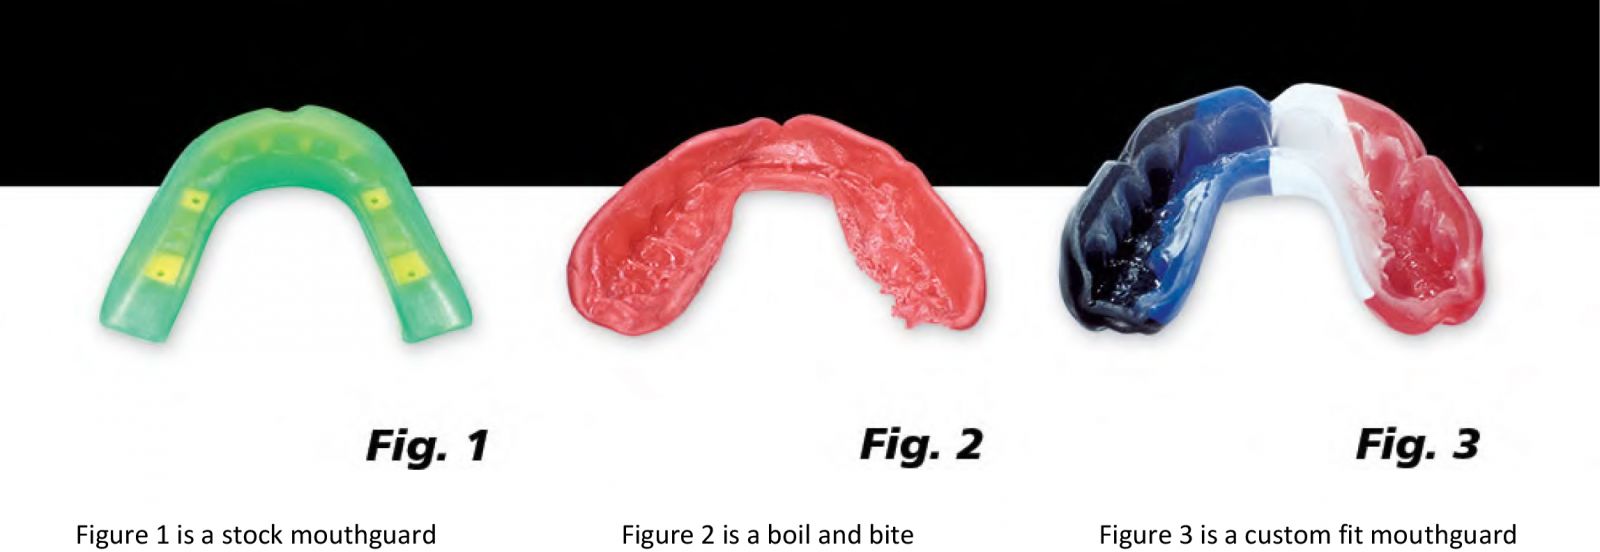 figures of mouthguards